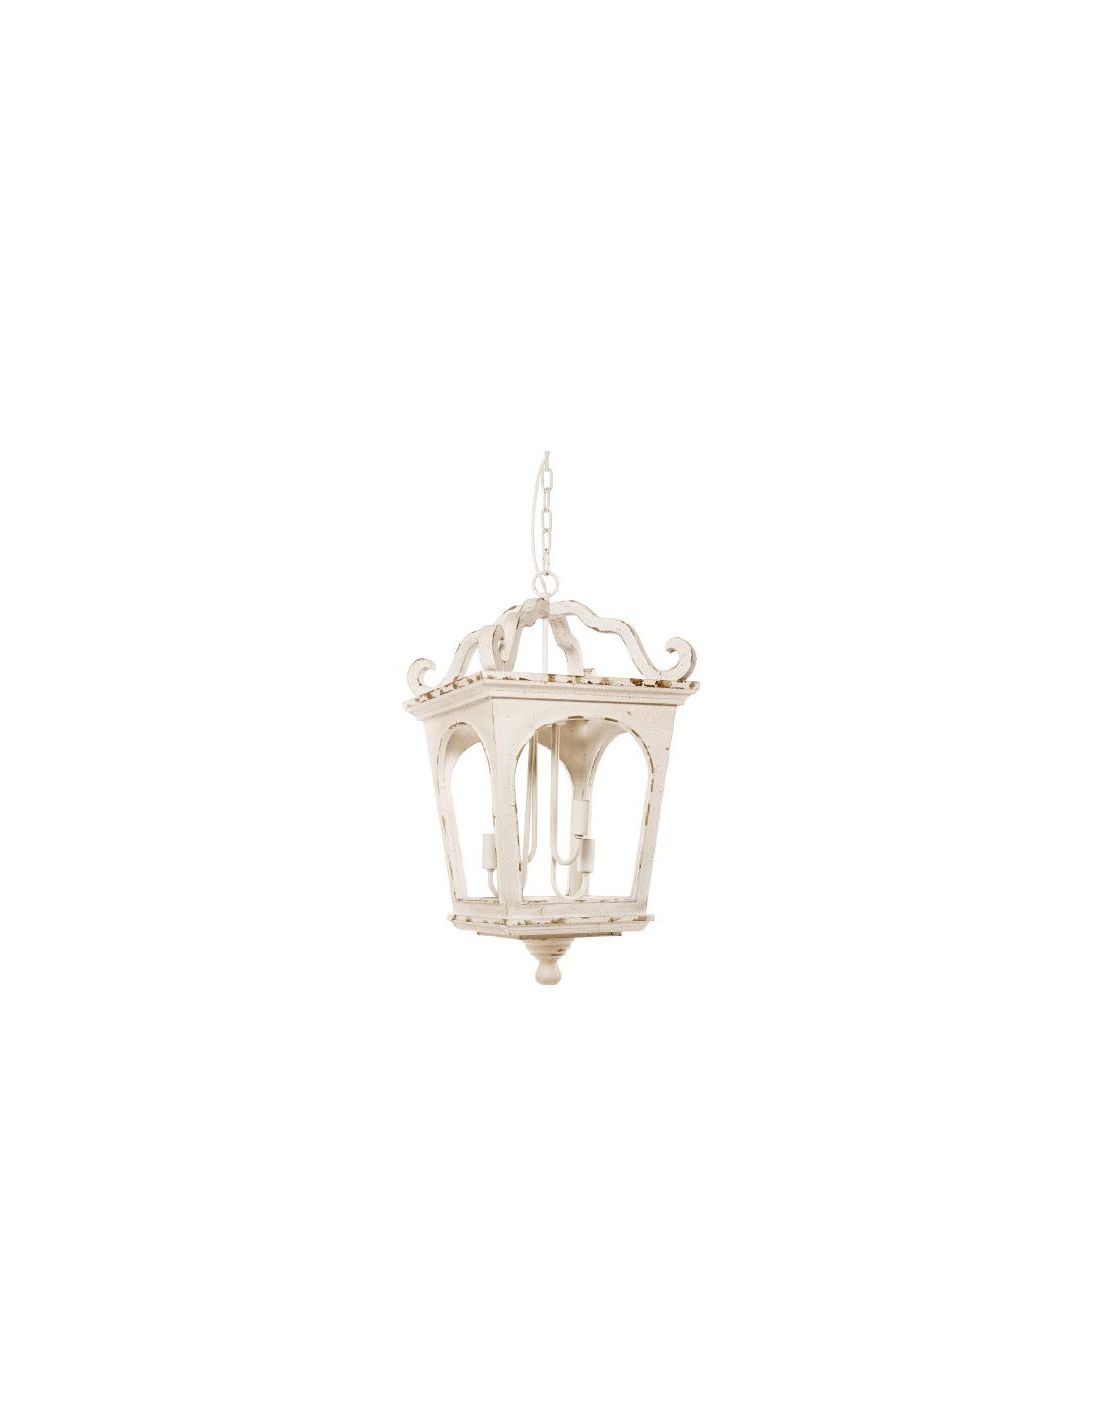 L'arte Di Nacchi Cf 02 Pendant Lamp Wooden Lantern Within Favorite Handcrafted Wood Lantern Chandeliers (View 13 of 15)